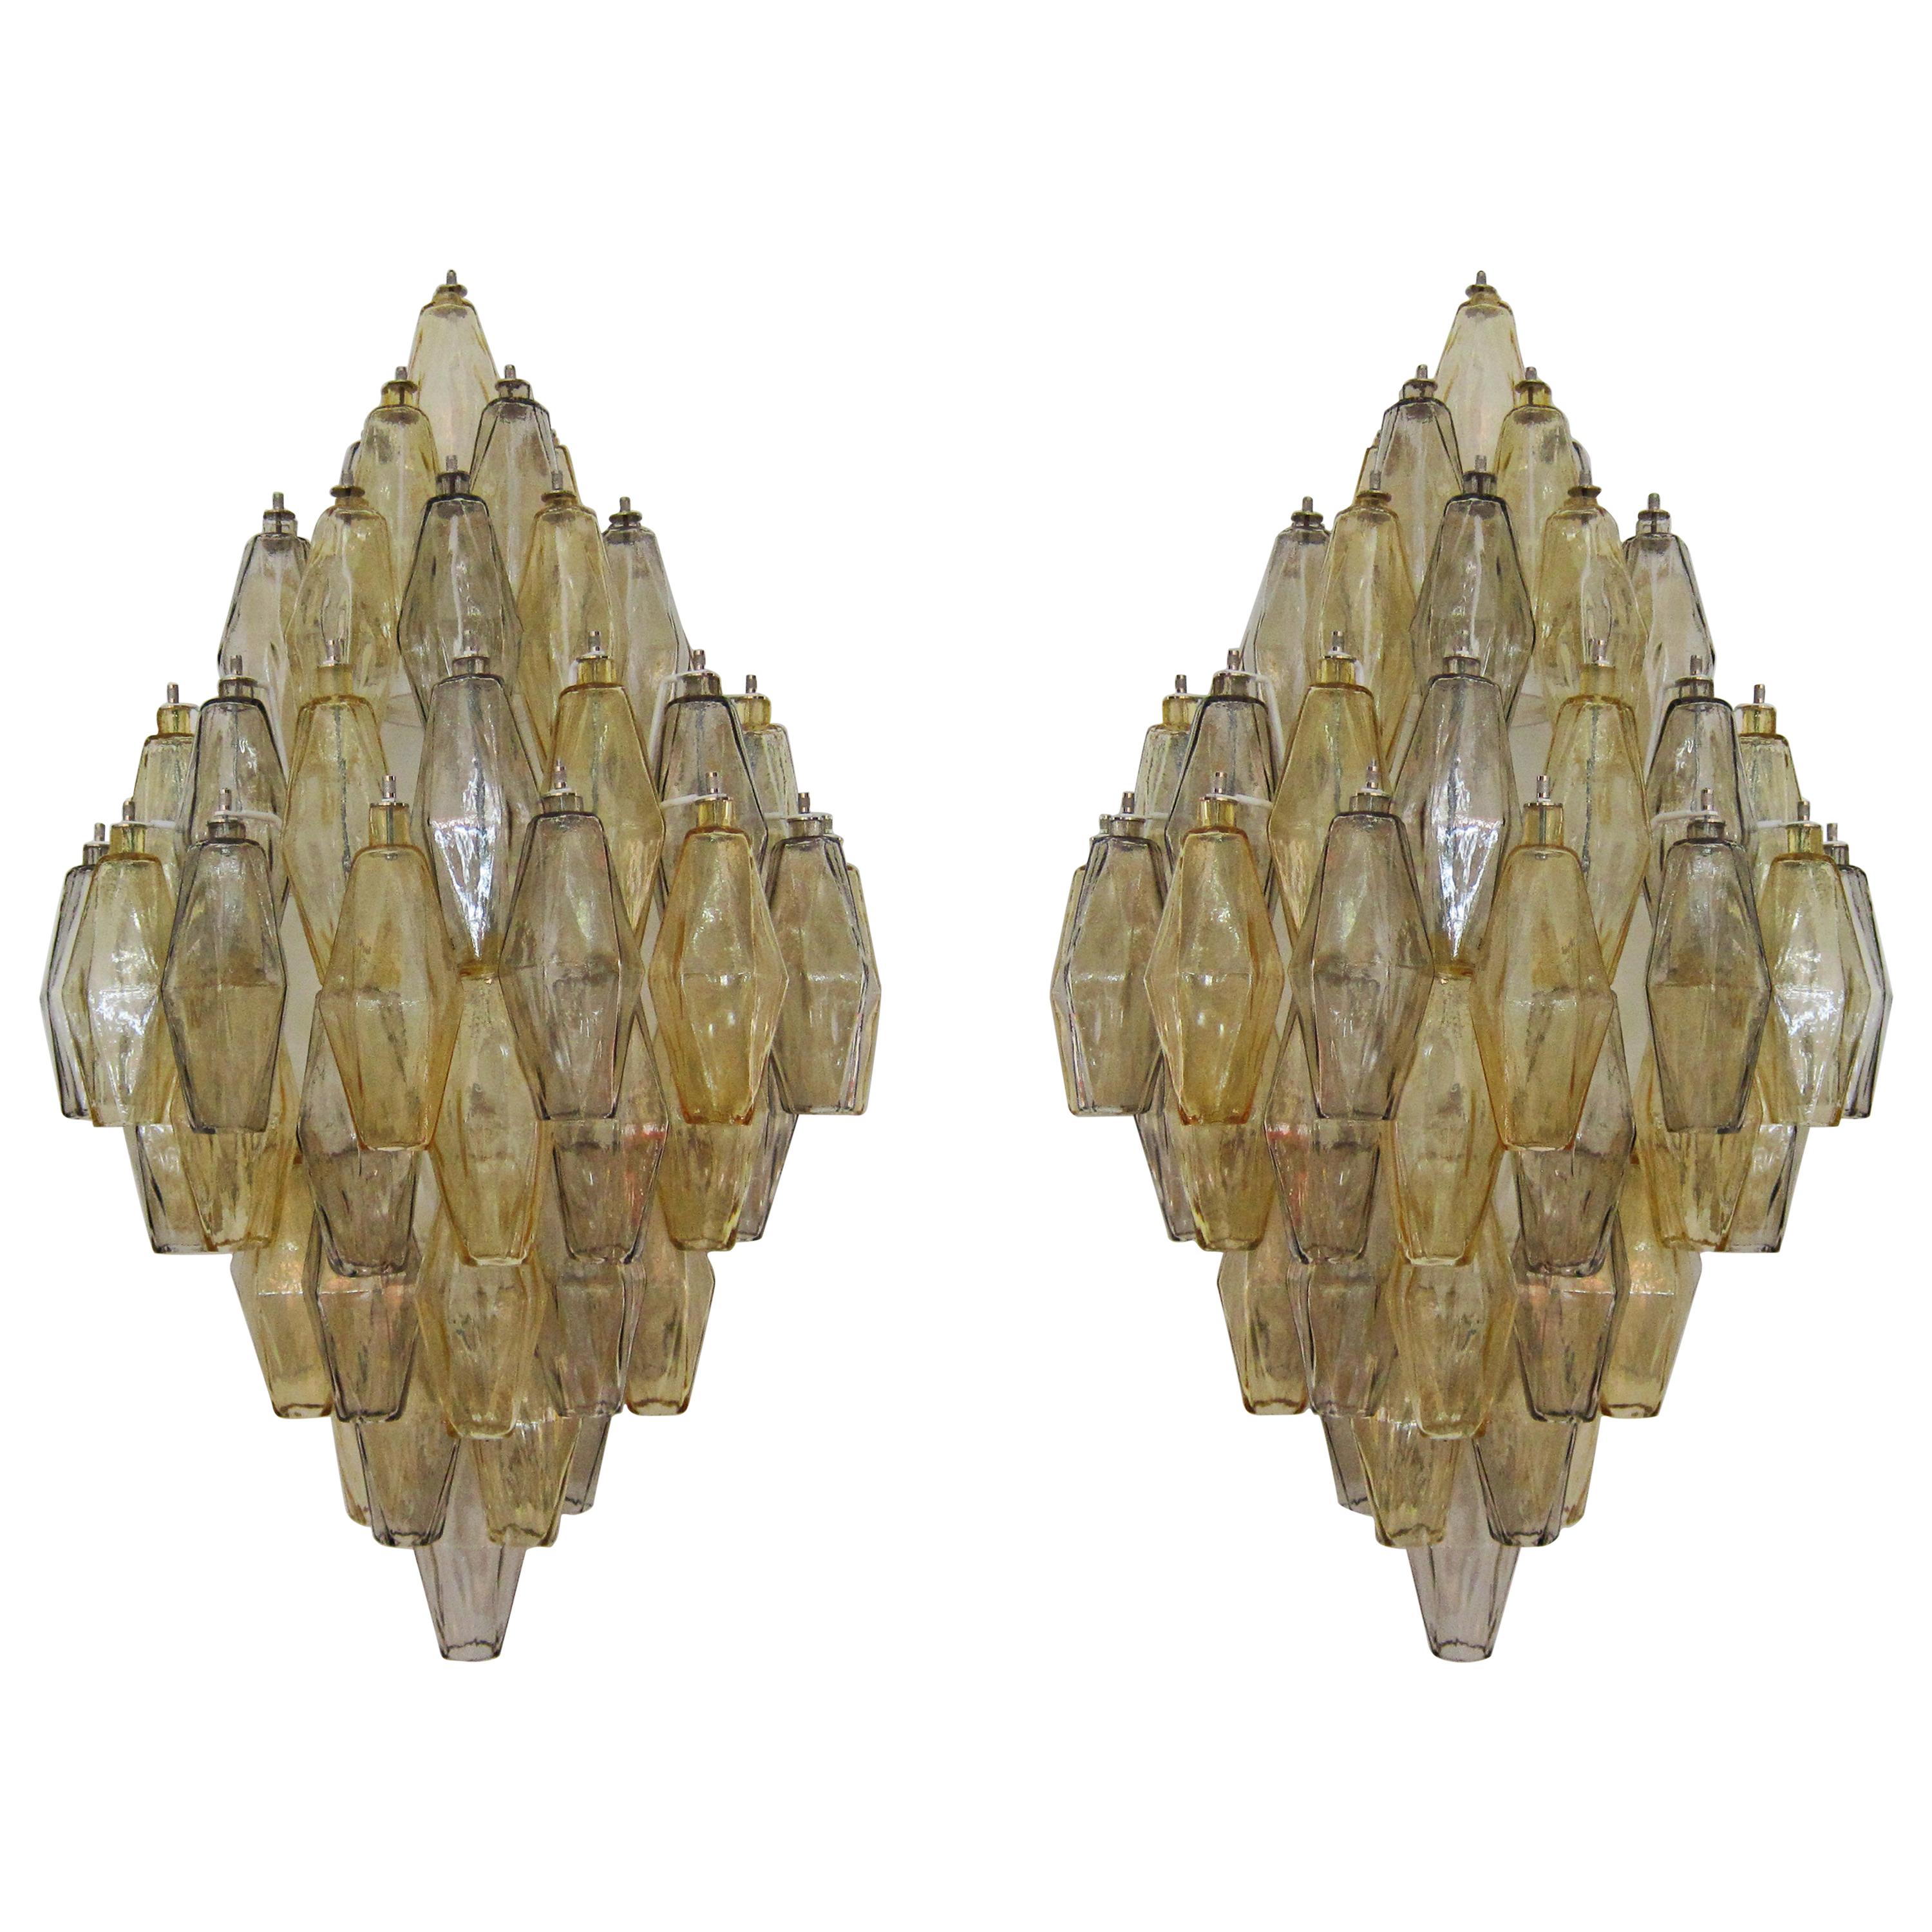  Pair of Glass Wall Lights,  style of Carlo Scarpa, Italy 1970's